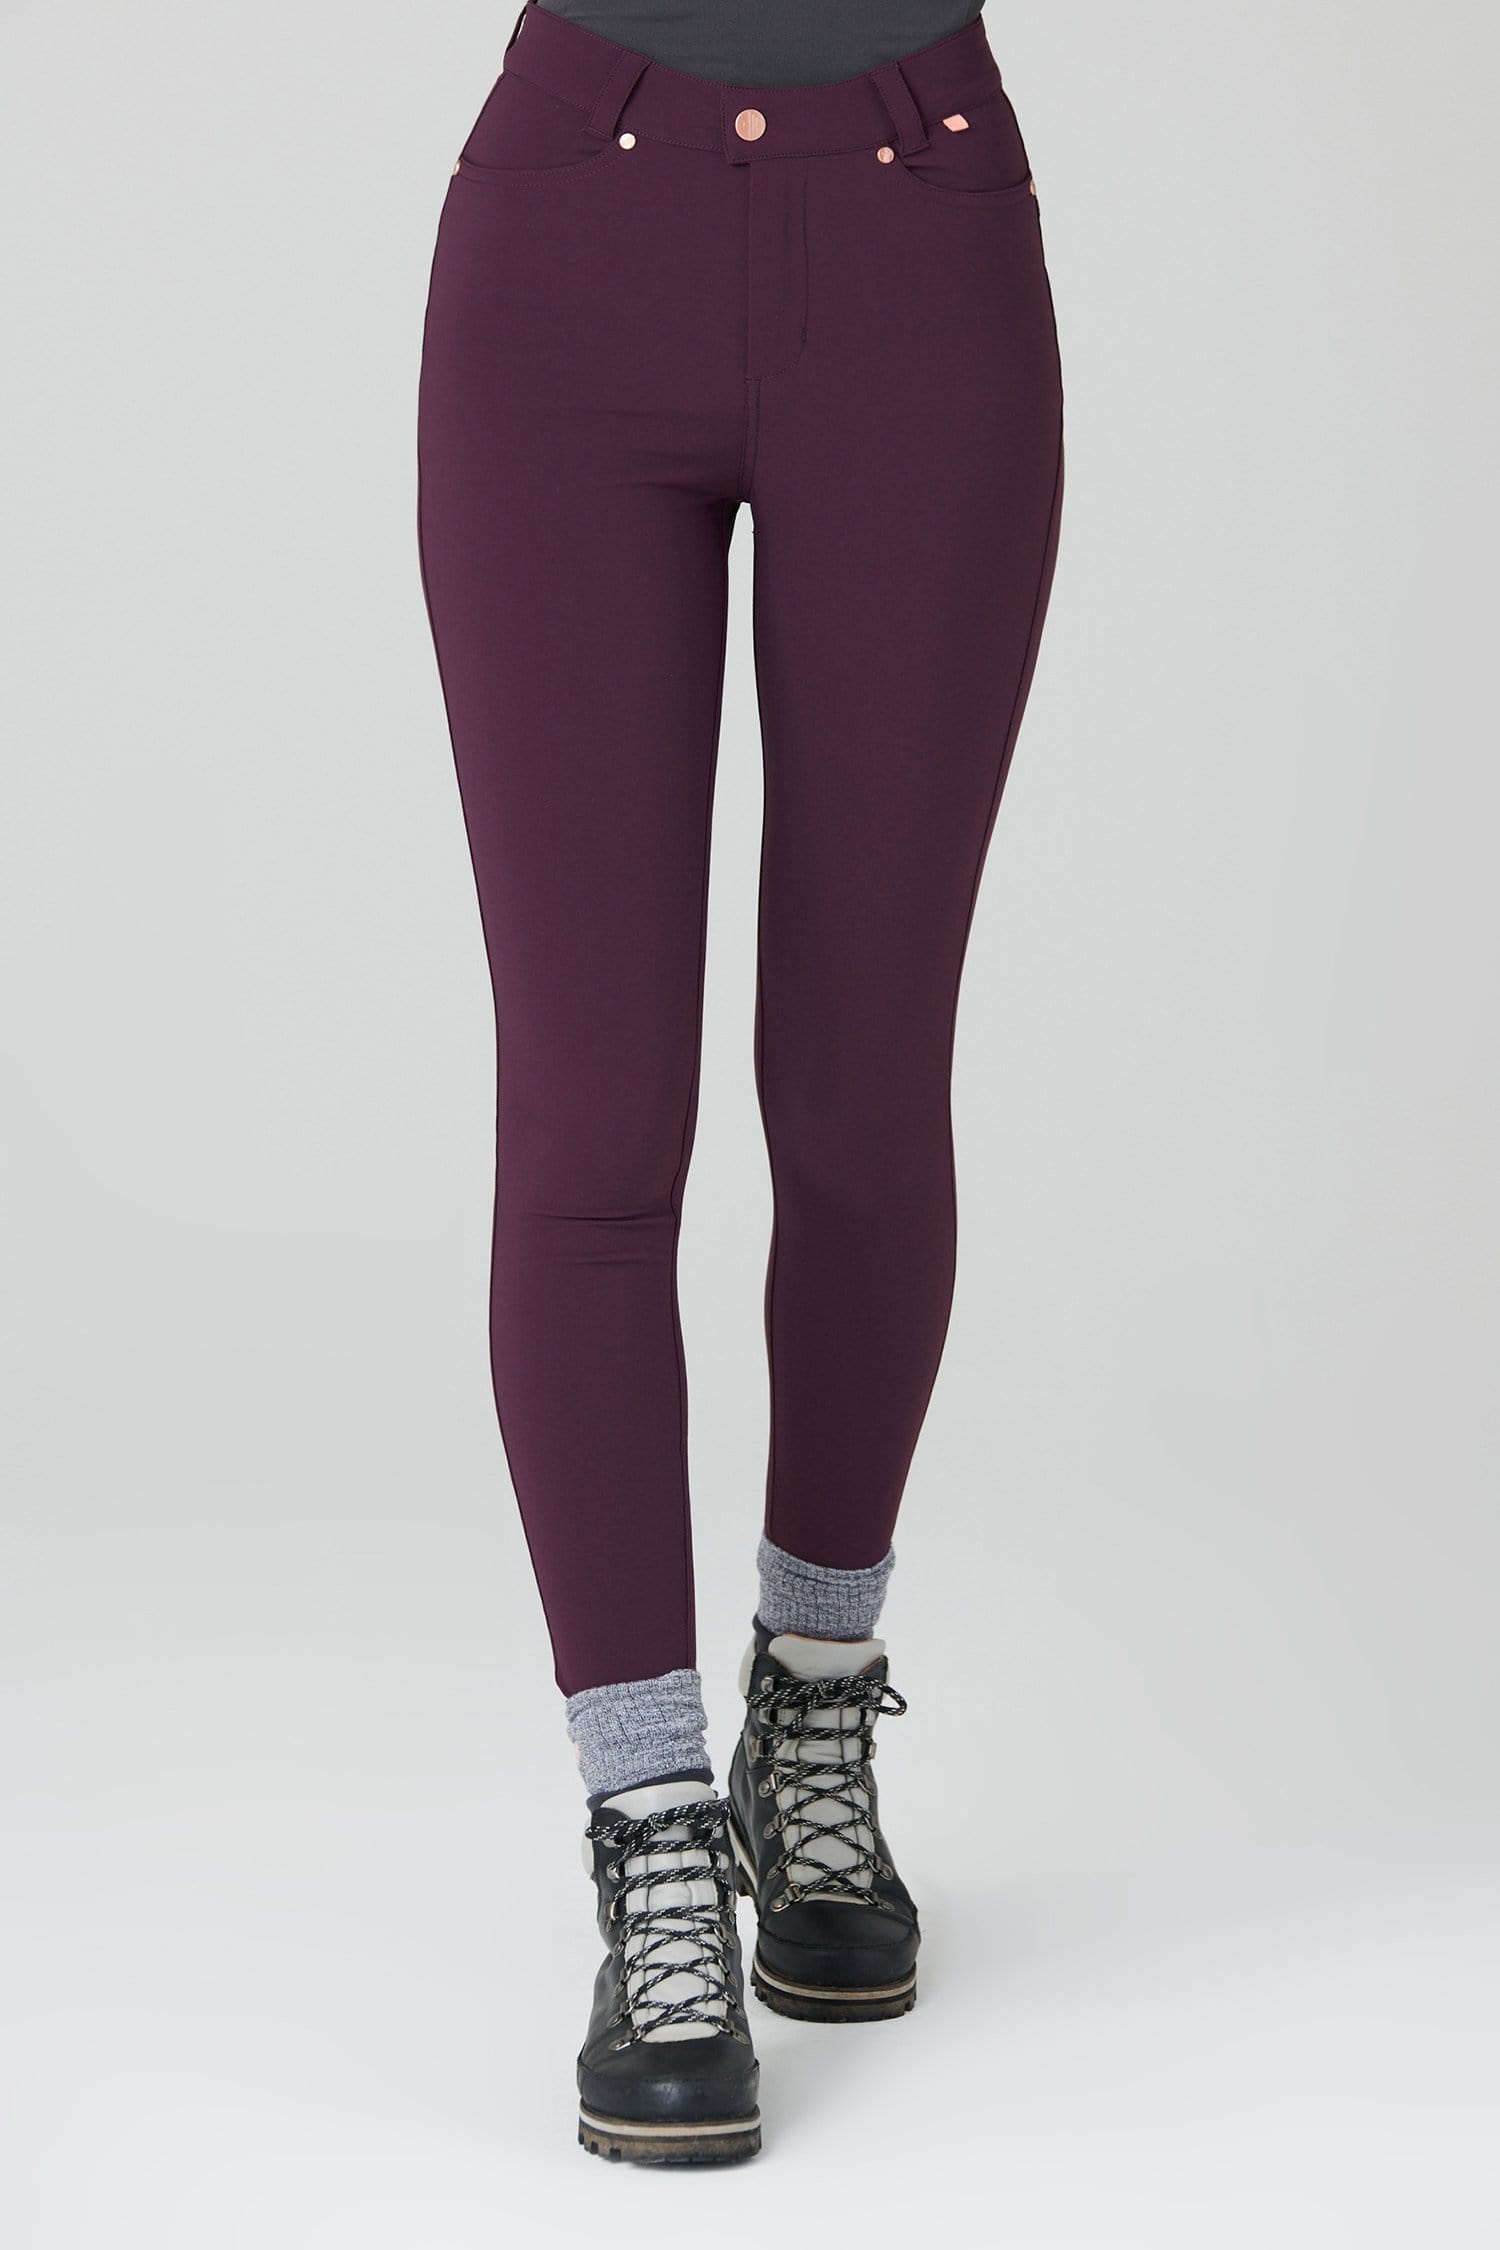 Max Stretch Skinny Outdoor Trousers - Aubergine - 34l / Uk16 - Womens - Acai Outdoorwear